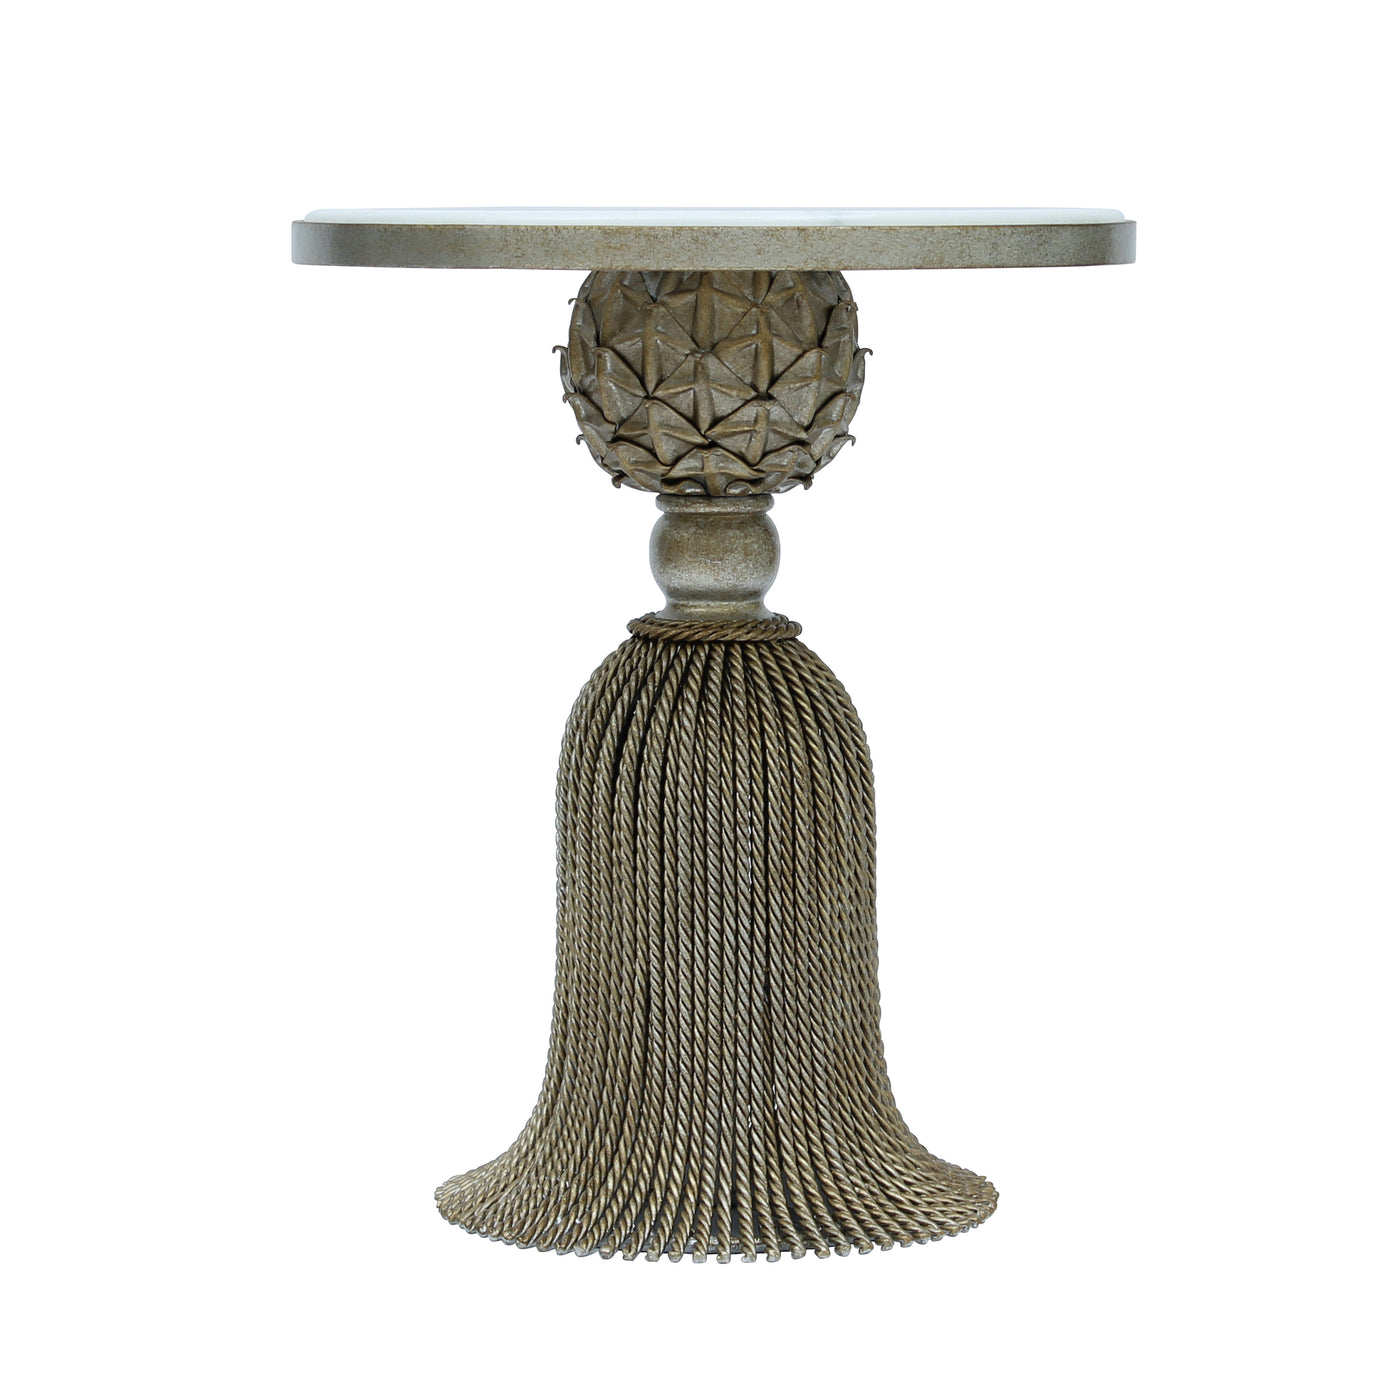 Unique accent table inspired by the curtain's tie in antique silver finish and topped with white marble